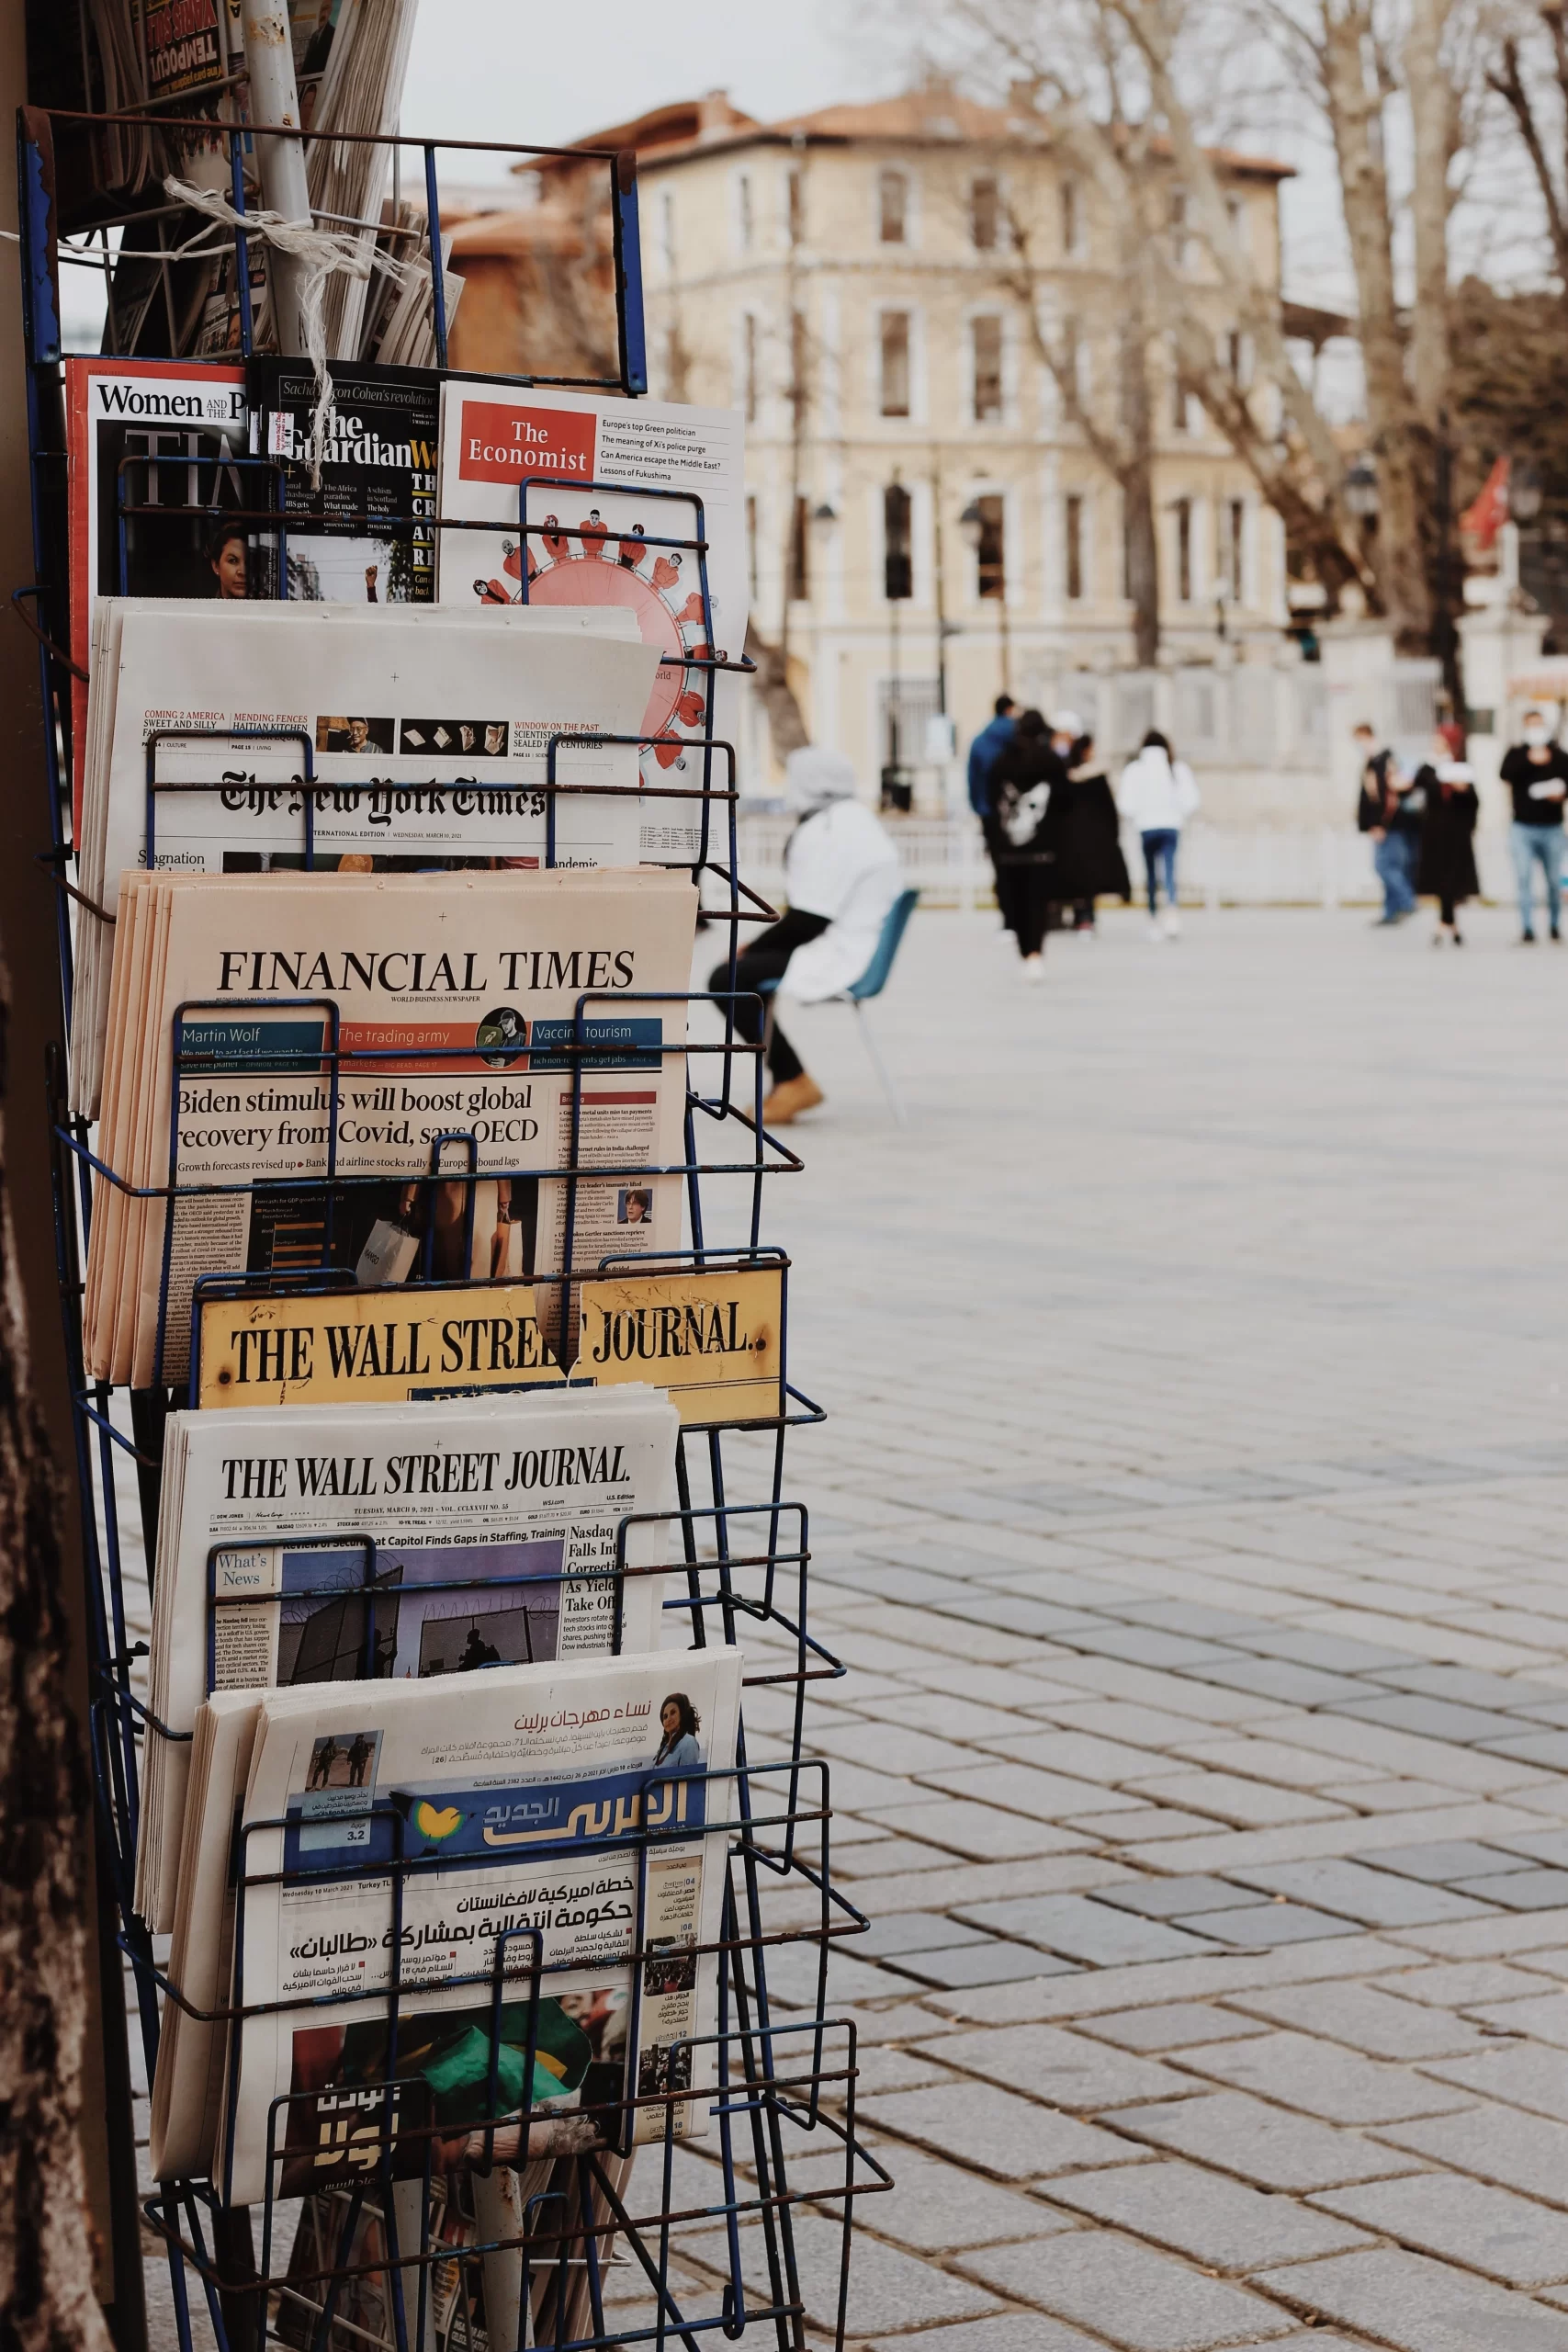 Newspapers in news rack on display.

Published on March 10, 2021
Canon, EOS 700D
Free to use under the Unsplash License